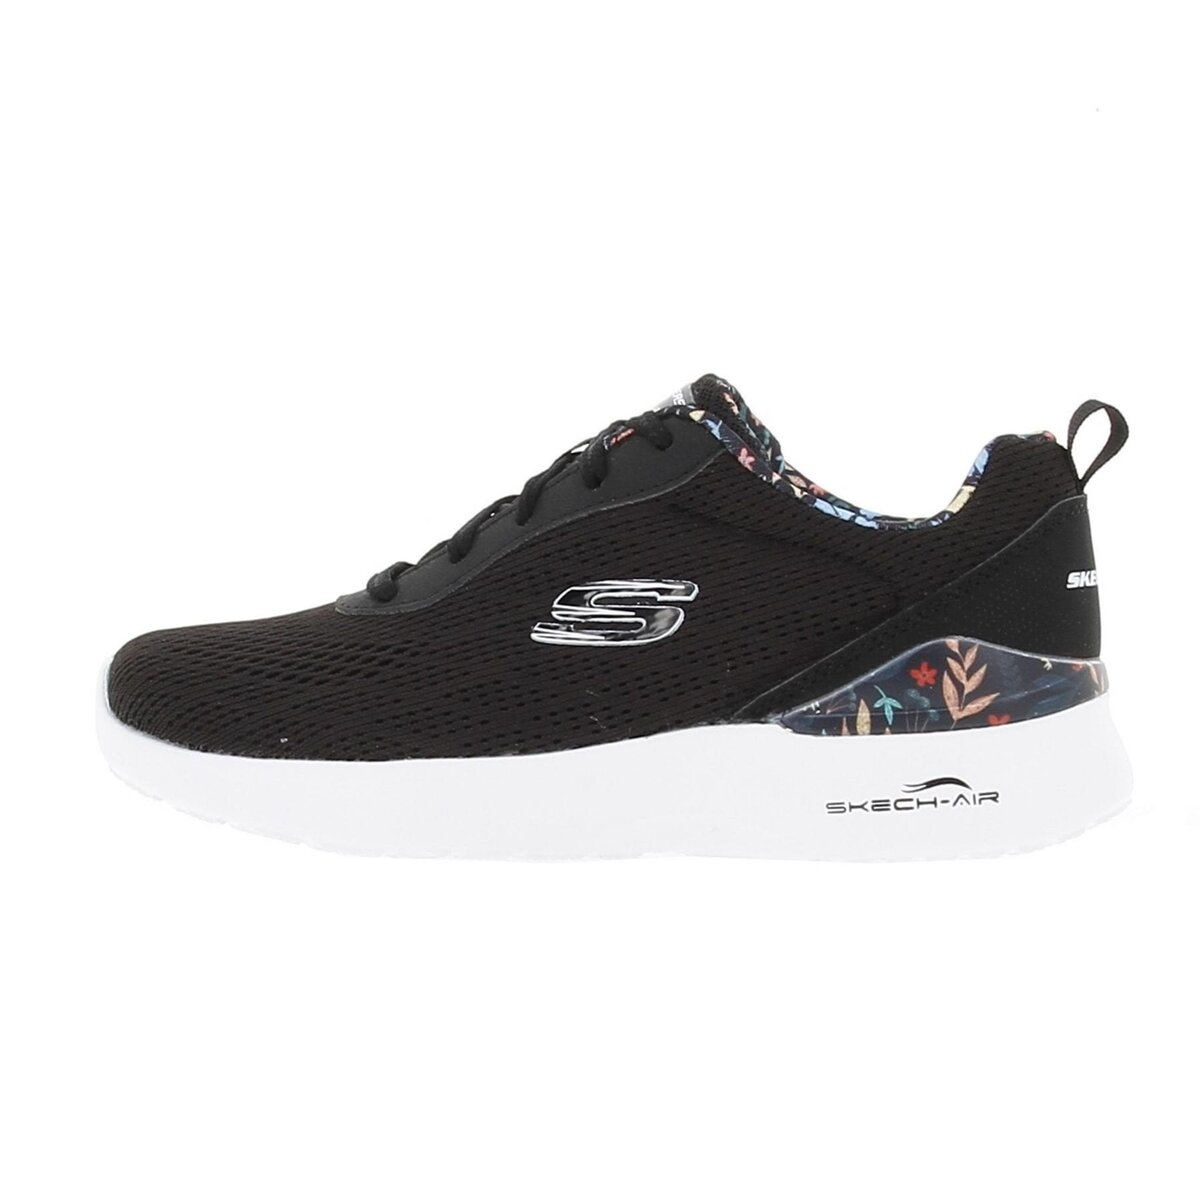 SKECHERS Chaussures multisport Skechers Skech-air dynamight - laid out  7-718